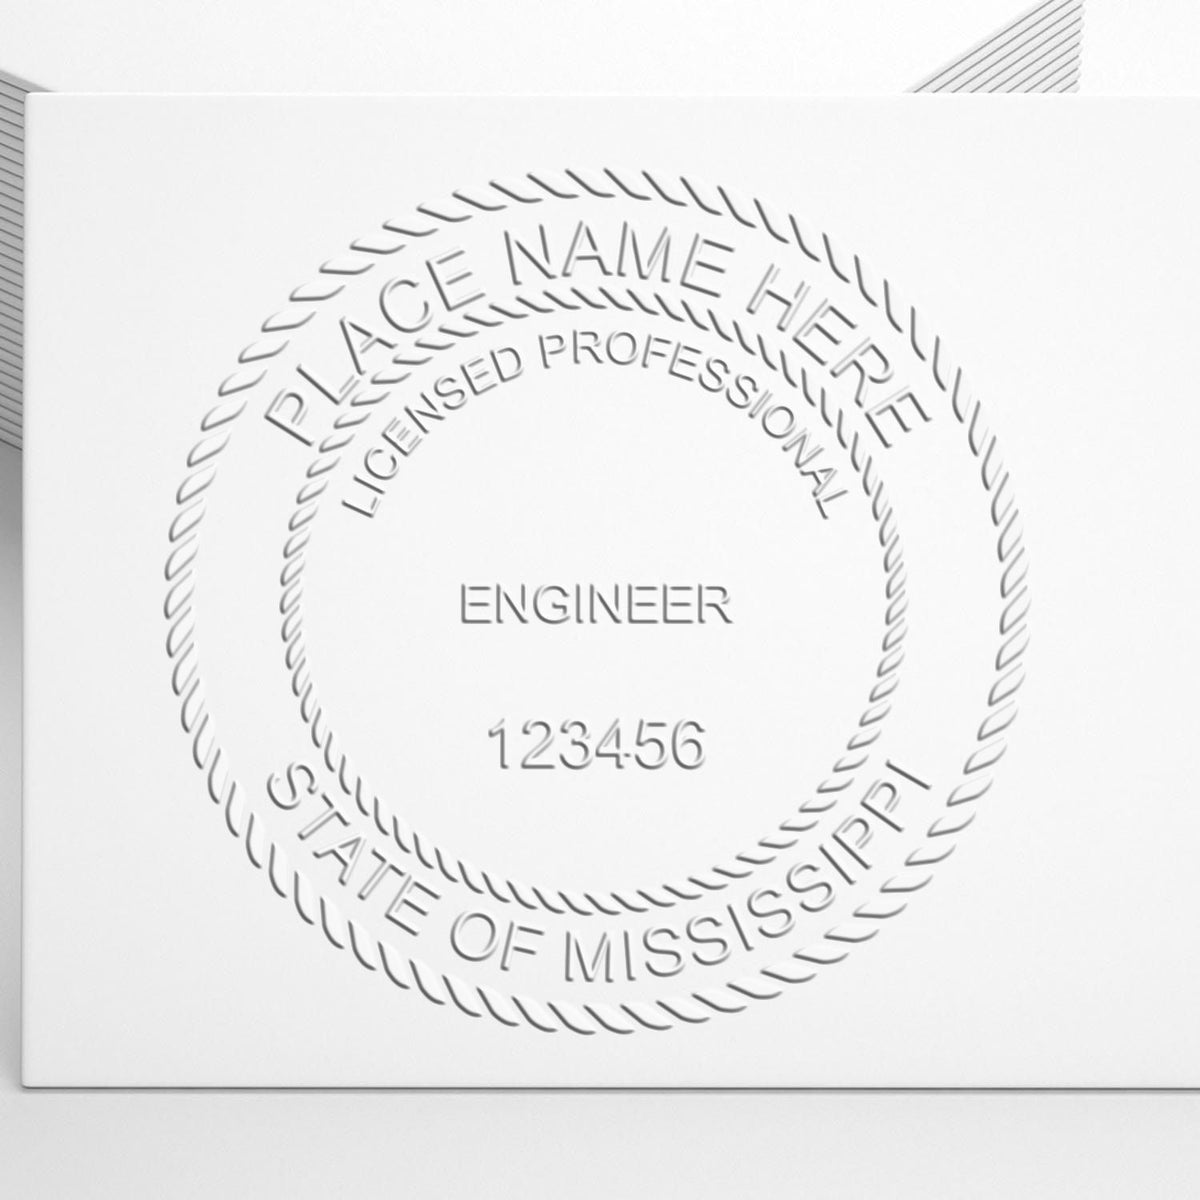 The Gift Mississippi Engineer Seal stamp impression comes to life with a crisp, detailed image stamped on paper - showcasing true professional quality.